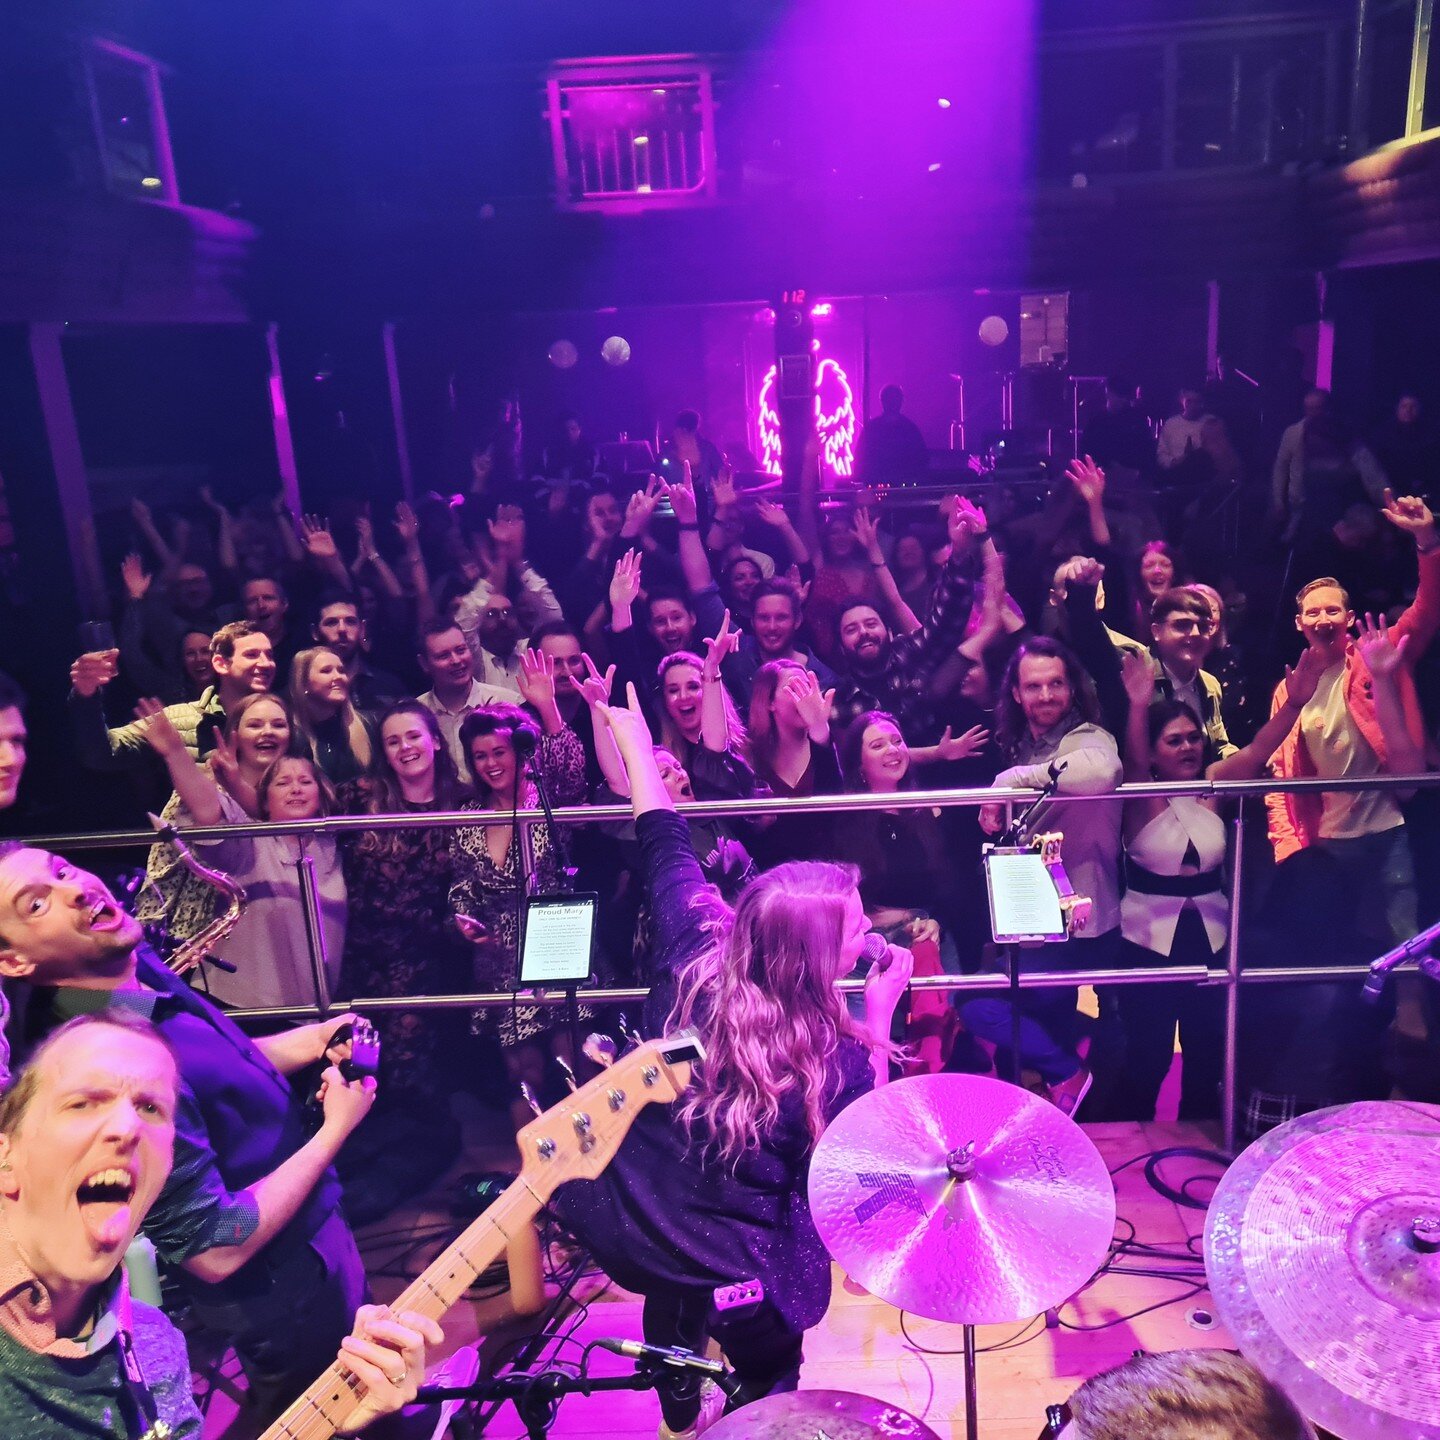 Reminising about this awesome gig we played at @thebuttermarket in #Shrewsbury last year. Cracking crowd!
.
.
.
.
.
.
.
#funtimes #bands #singer #musician #livemusic #instamusic #guitarist #drums #gigs #gigvenue #shrewsbury #shropshire